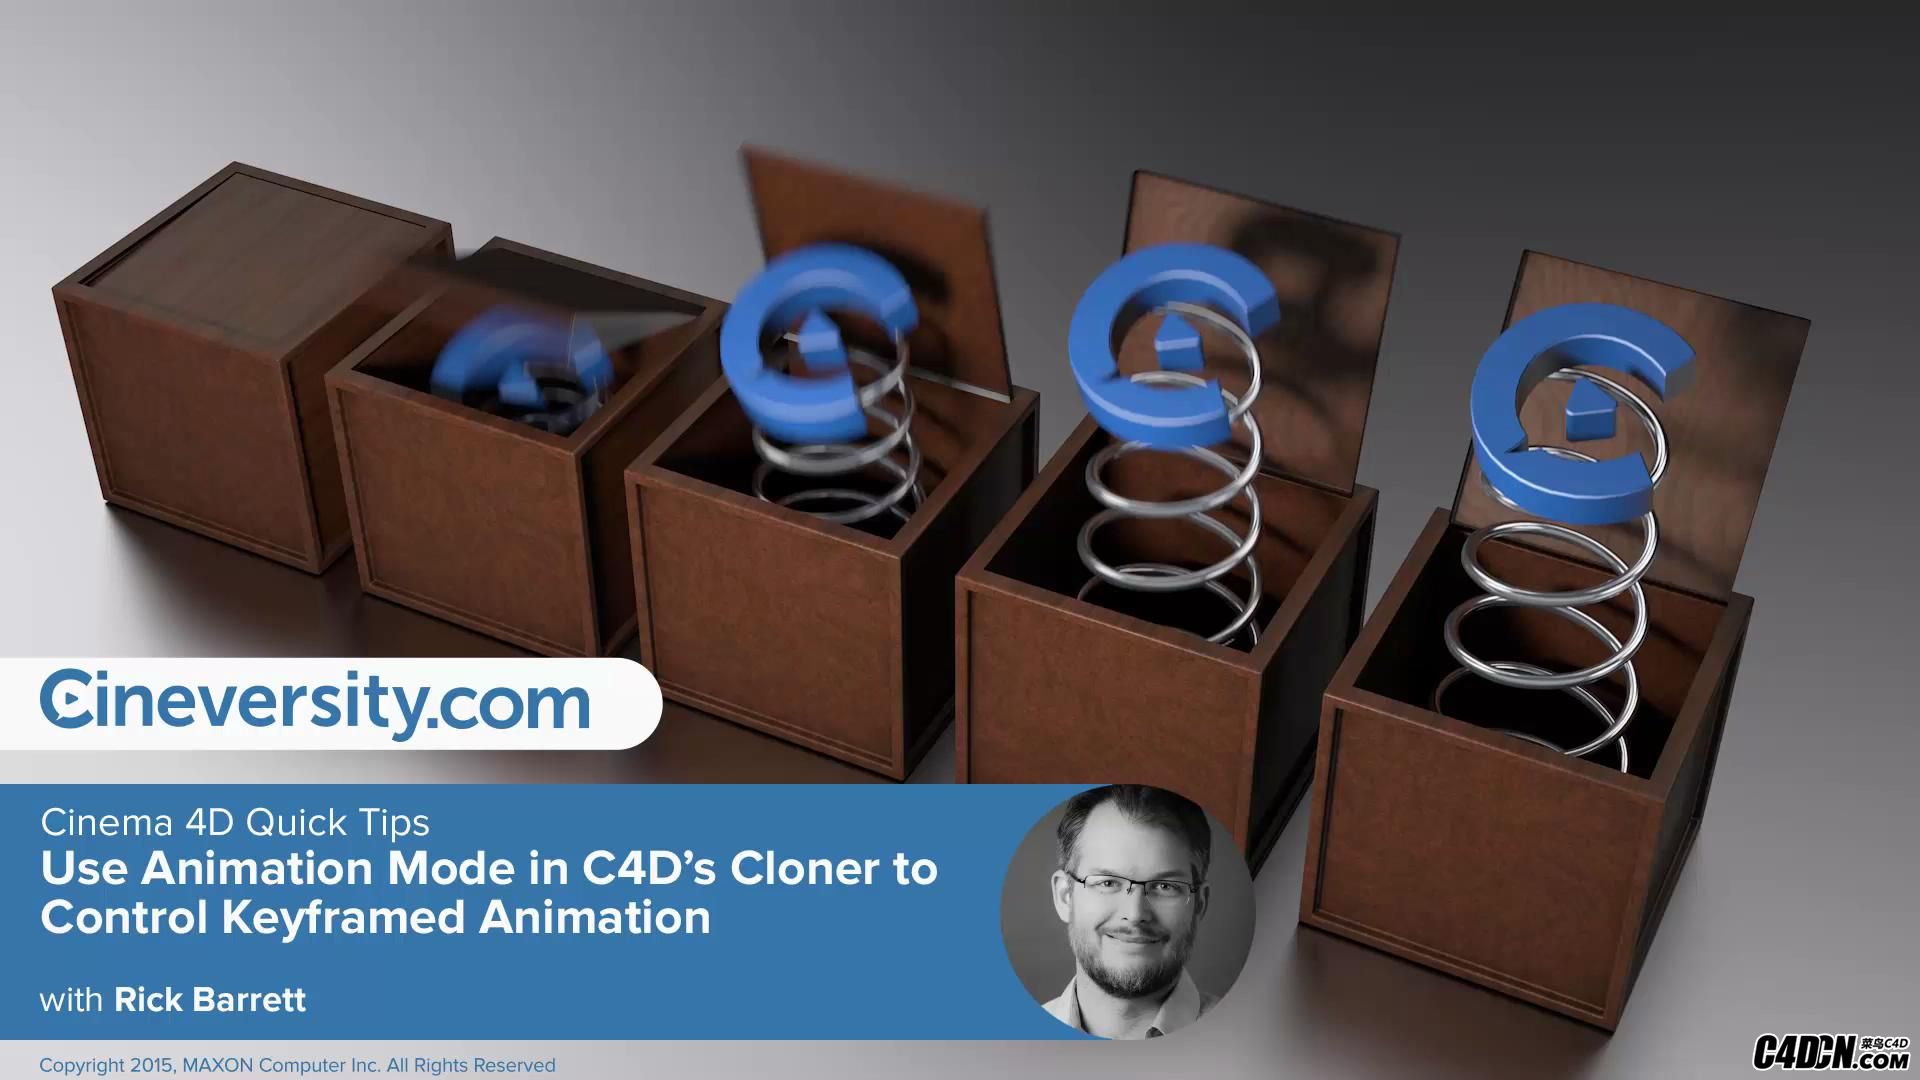 01 Use Animation Mode in C4Ds Cloner to Control Keyframed Animation_20160821232456.JPG